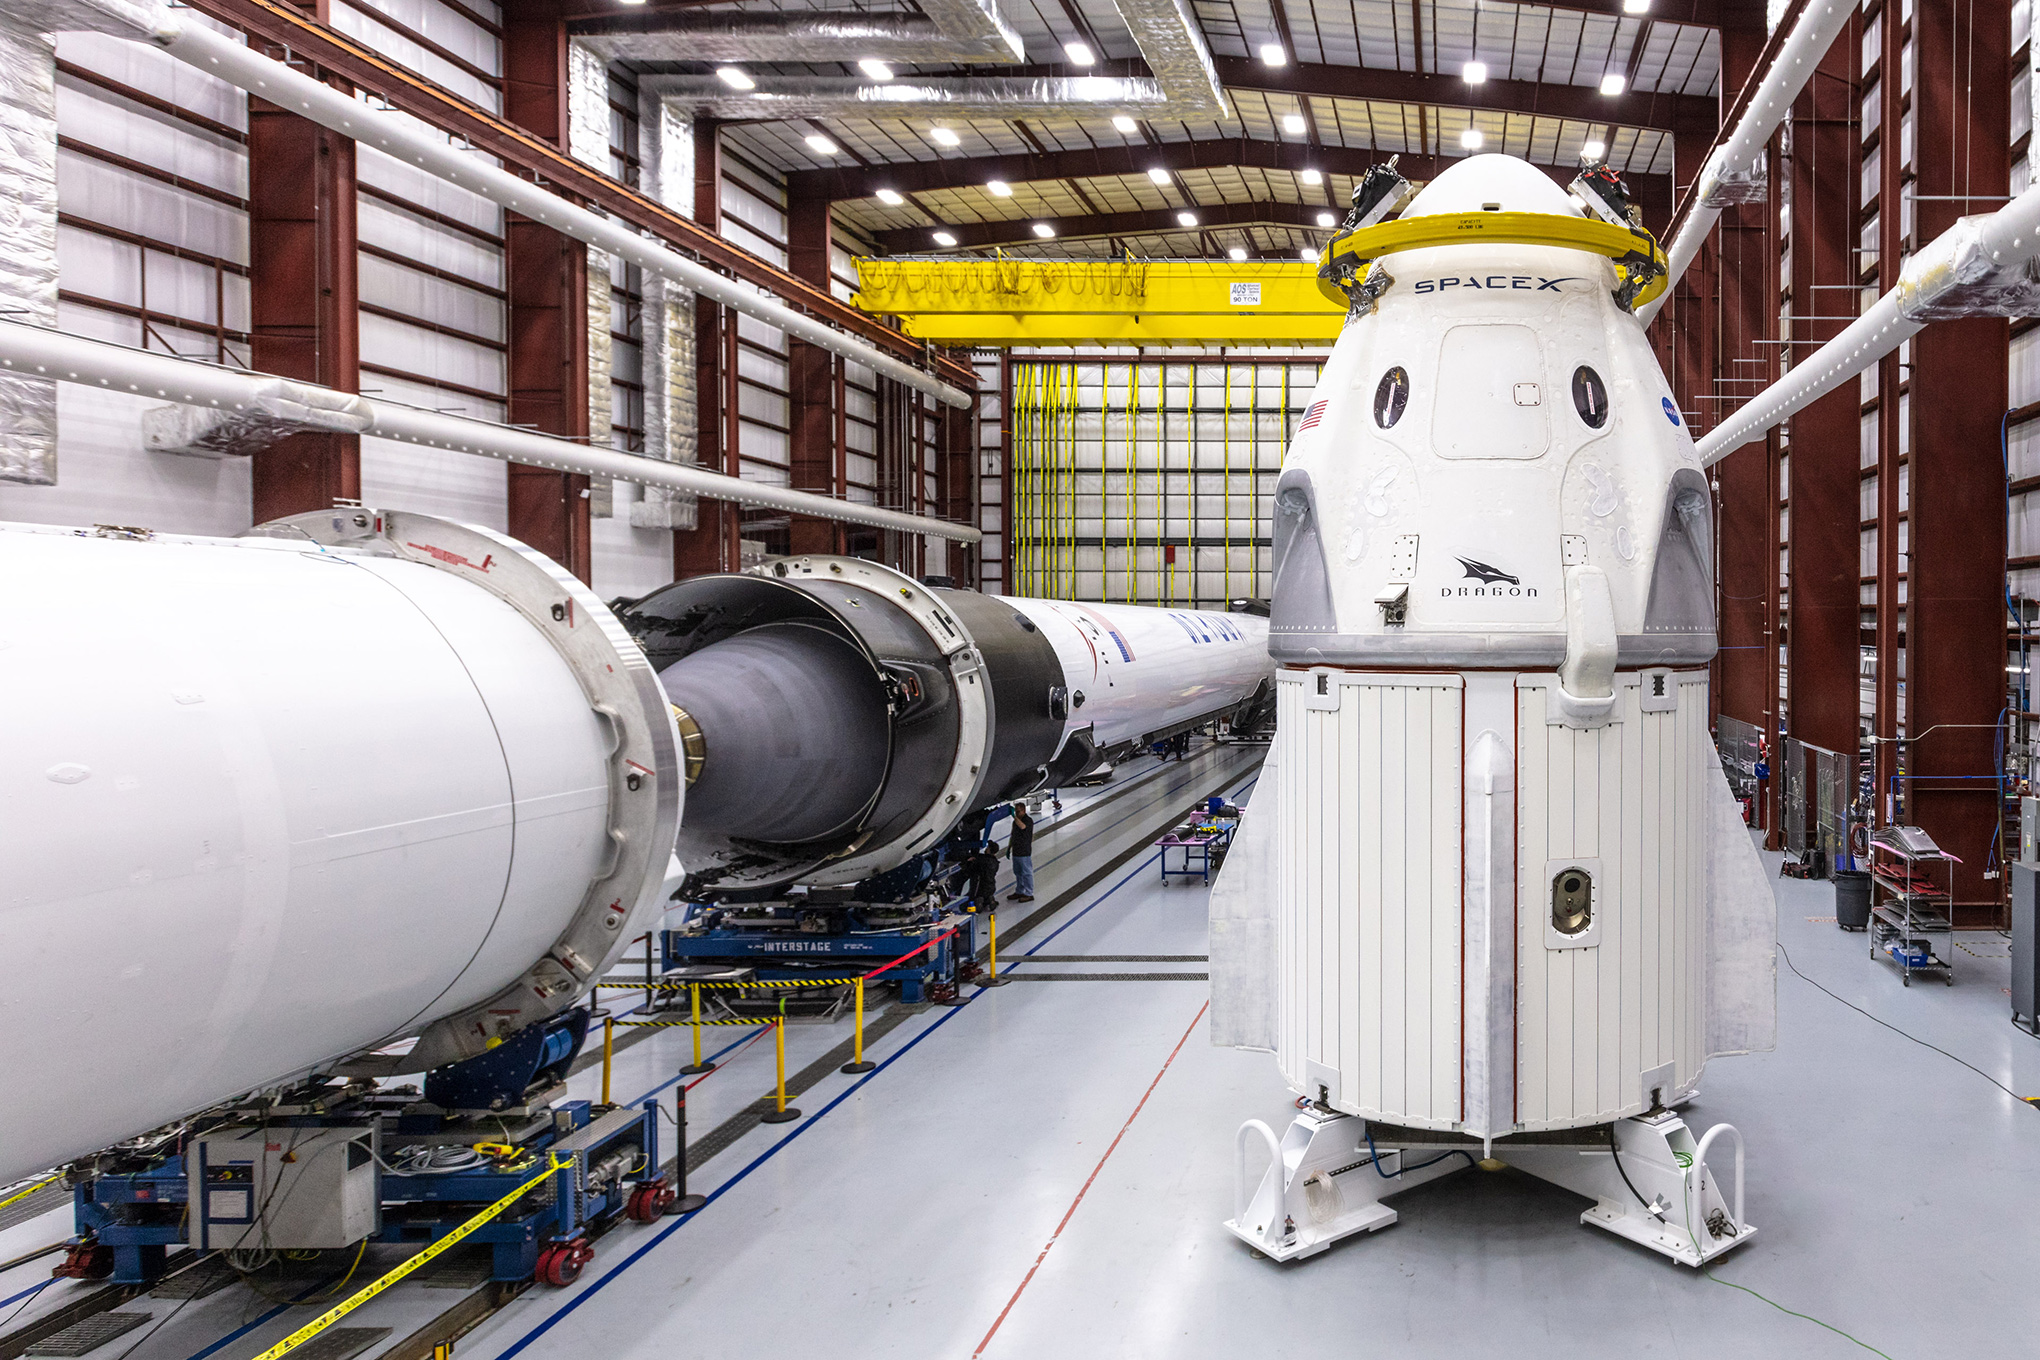 The <em>Crew Dragon</em> spacecraft before being mated to its Falcon 9 rocket (left); the Falcon's second stage is disposable, and the first stage returns to Earth, landing on a barge, to be refitted and reused. (Courtesy SpaceX/NASA)